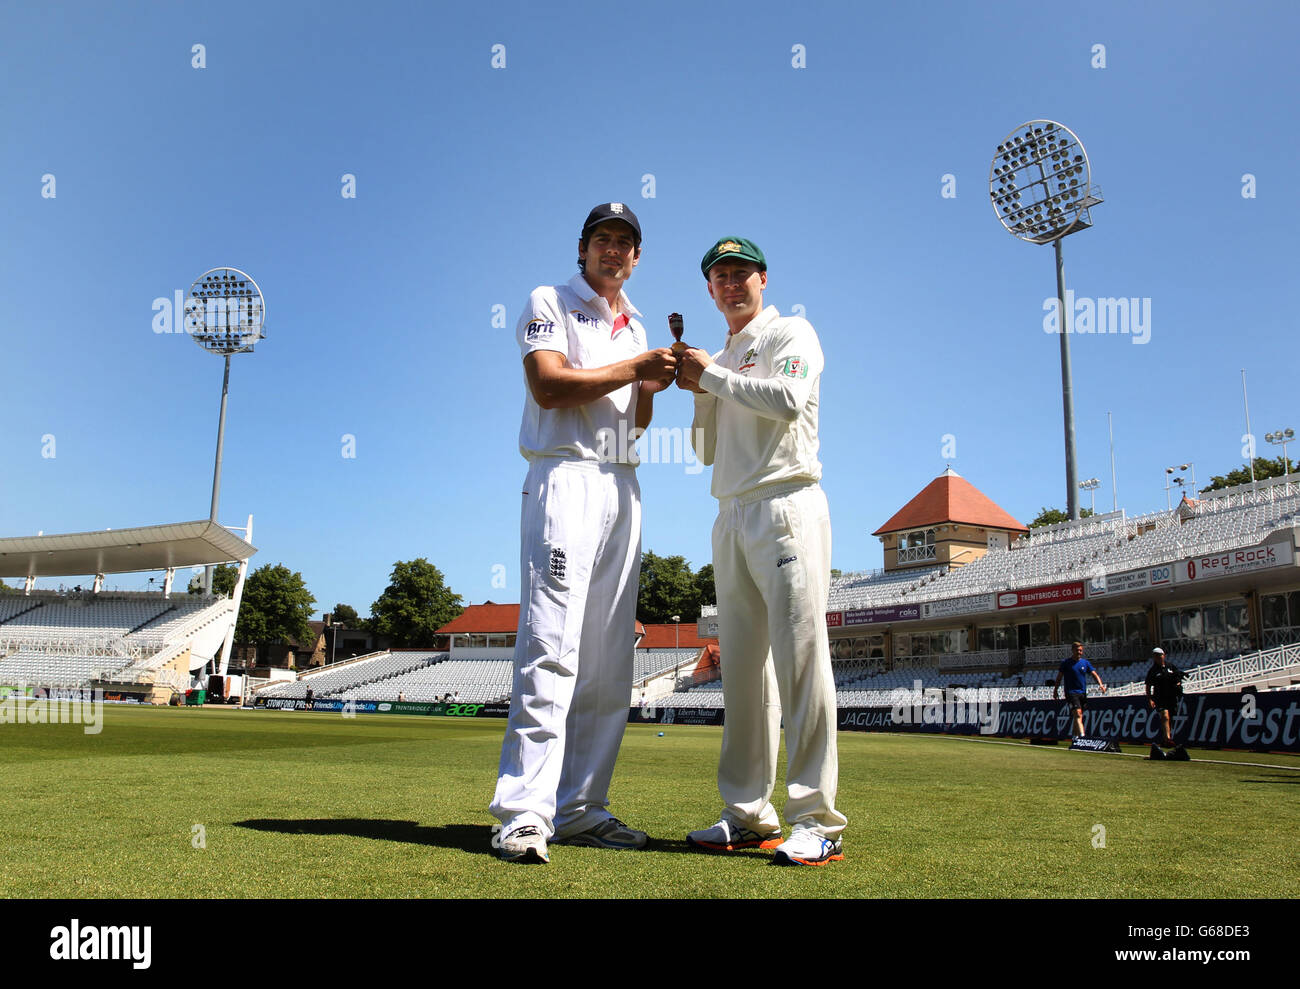 Cricket - First Investec Ashes Test - England v Australia - England Nets Session - Day Three - Trent Bridge. England captain Alastair Cook with Australia captain Michael Clarke holding the Ashes at Trent Bridge that starts tomorrow in Nottingham. Stock Photo